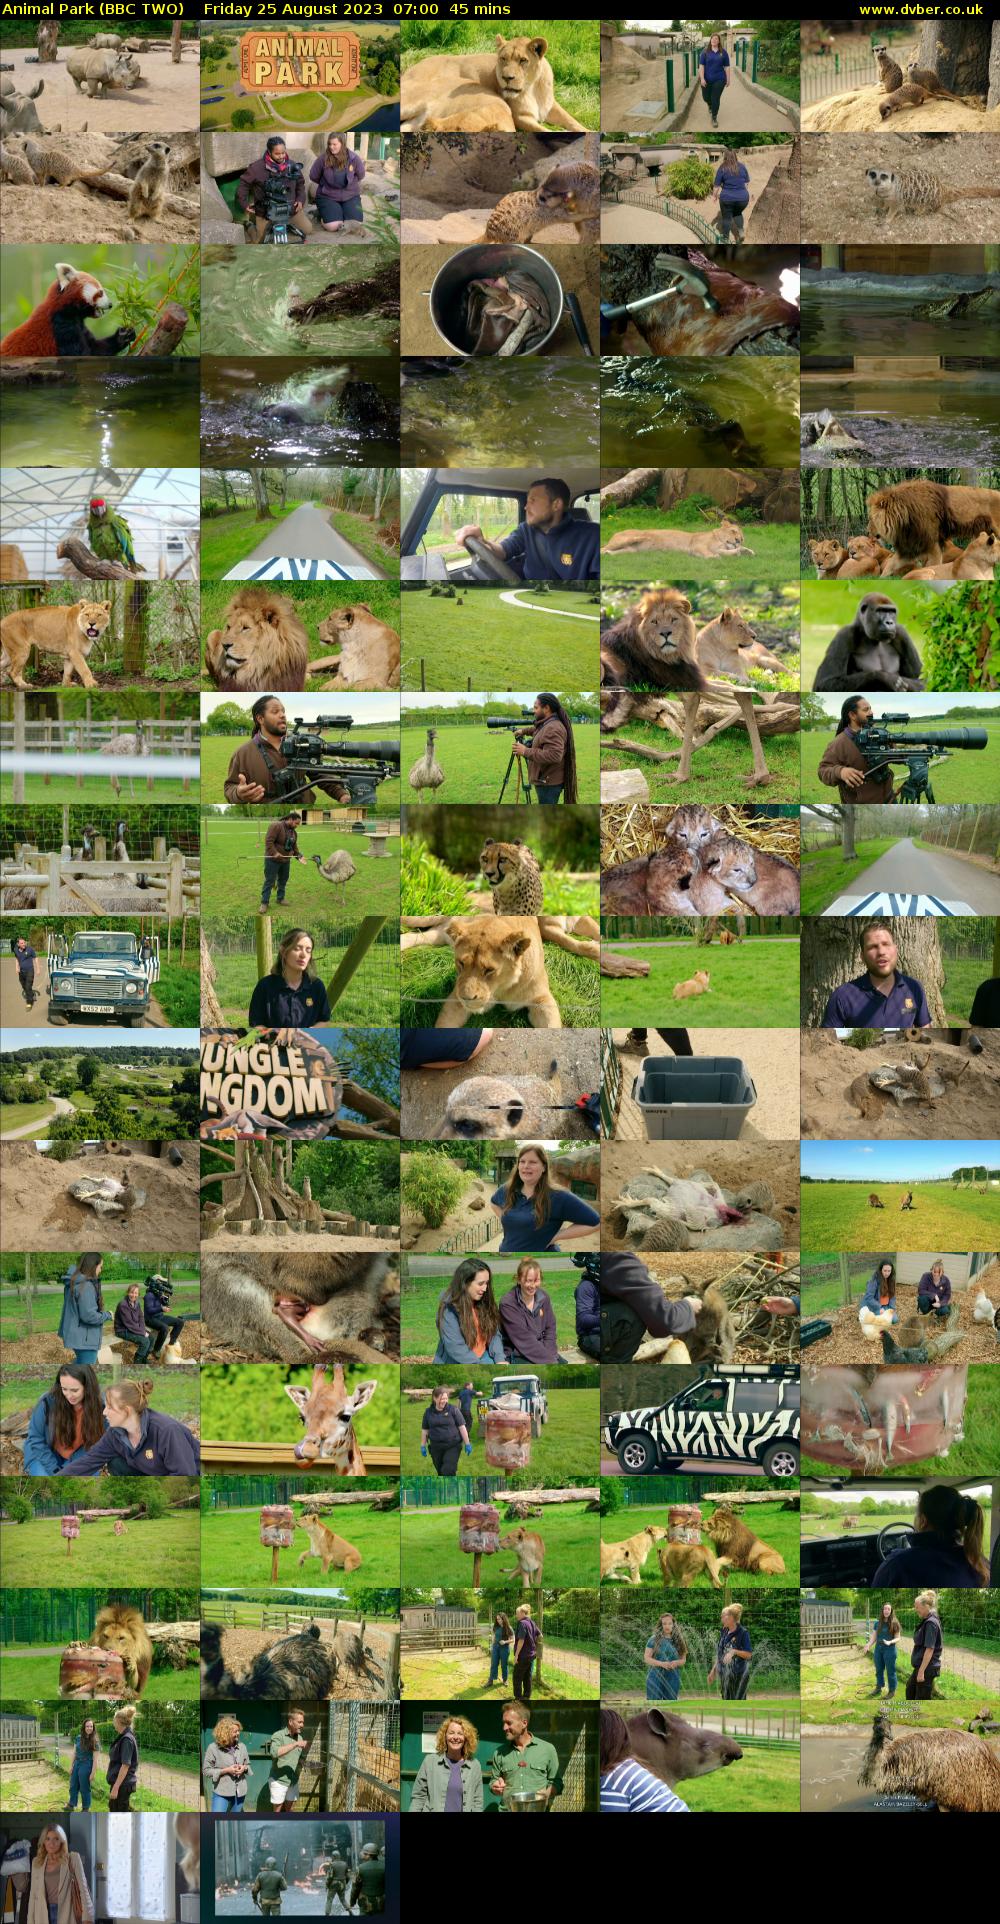 Animal Park (BBC TWO) Friday 25 August 2023 07:00 - 07:45